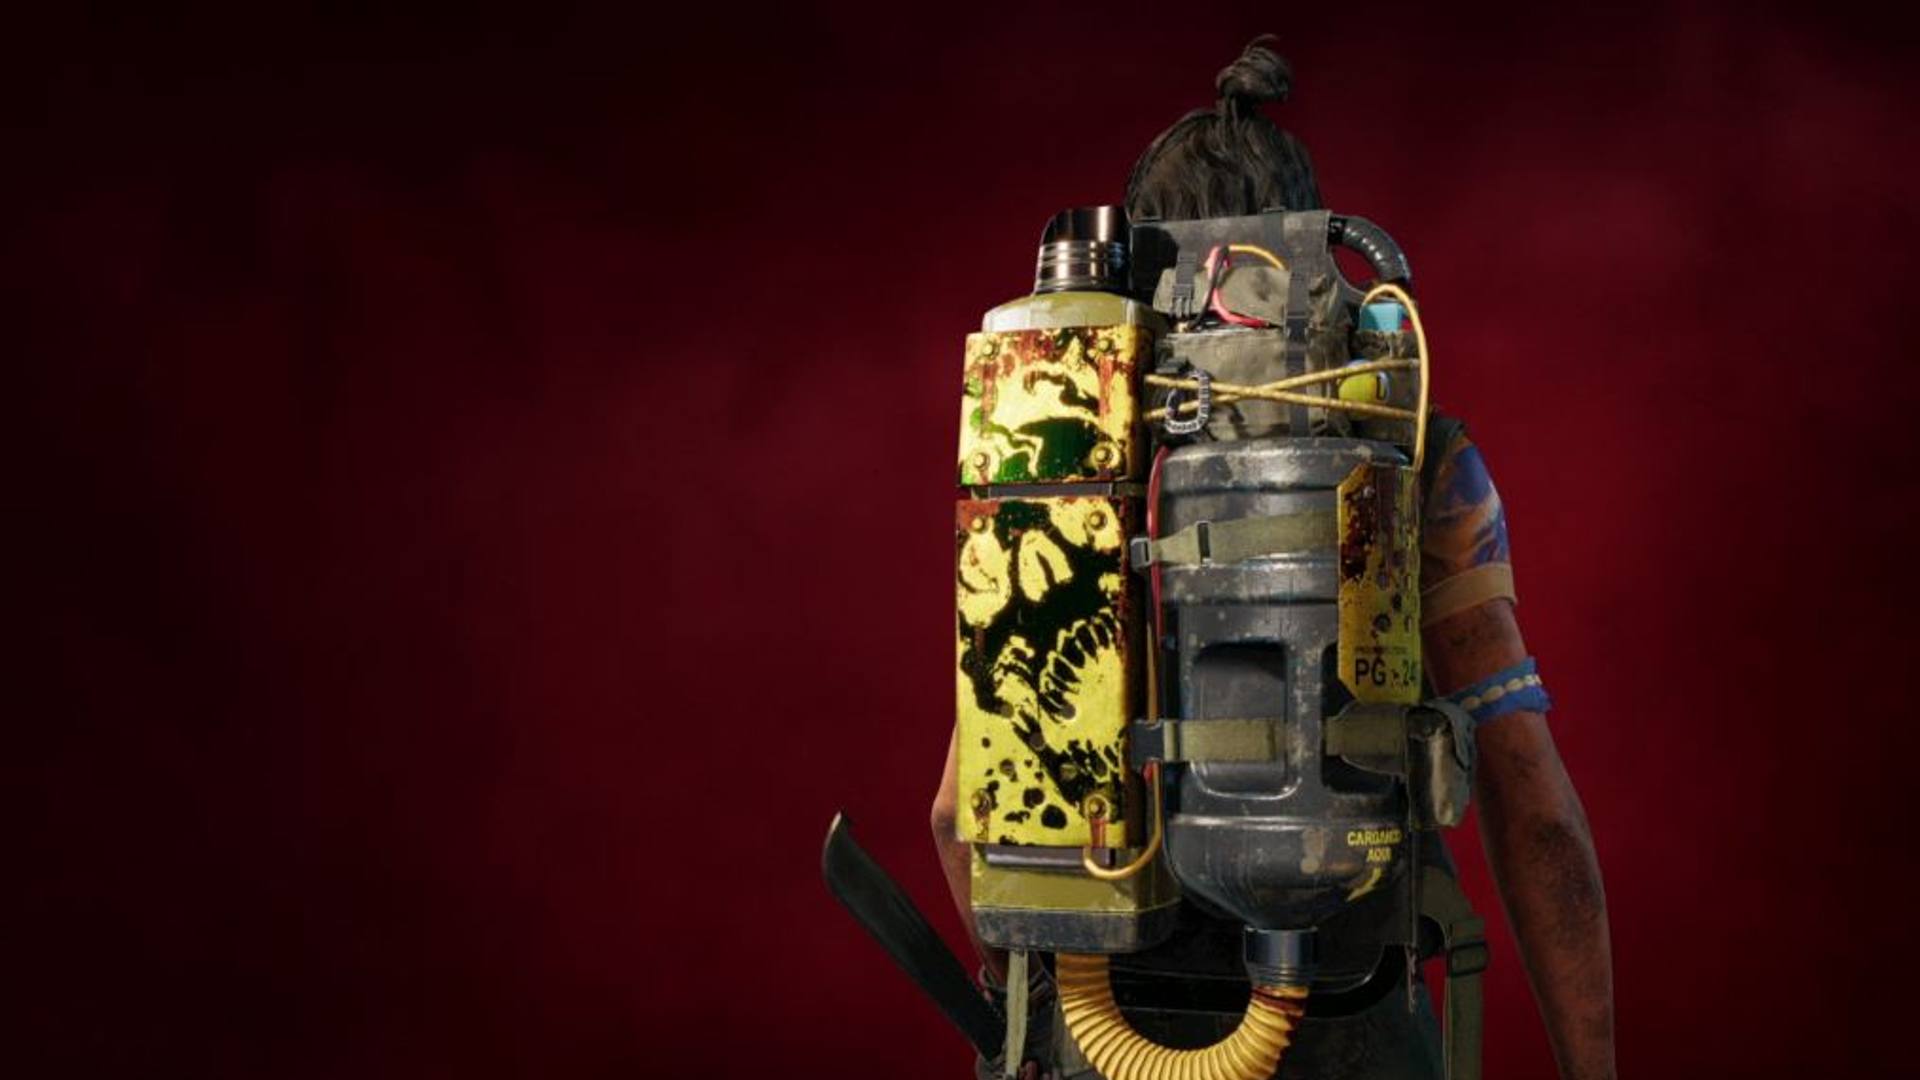 Far Cry 6 Supremo Backpack Guide: All Backpack Abilities and Where